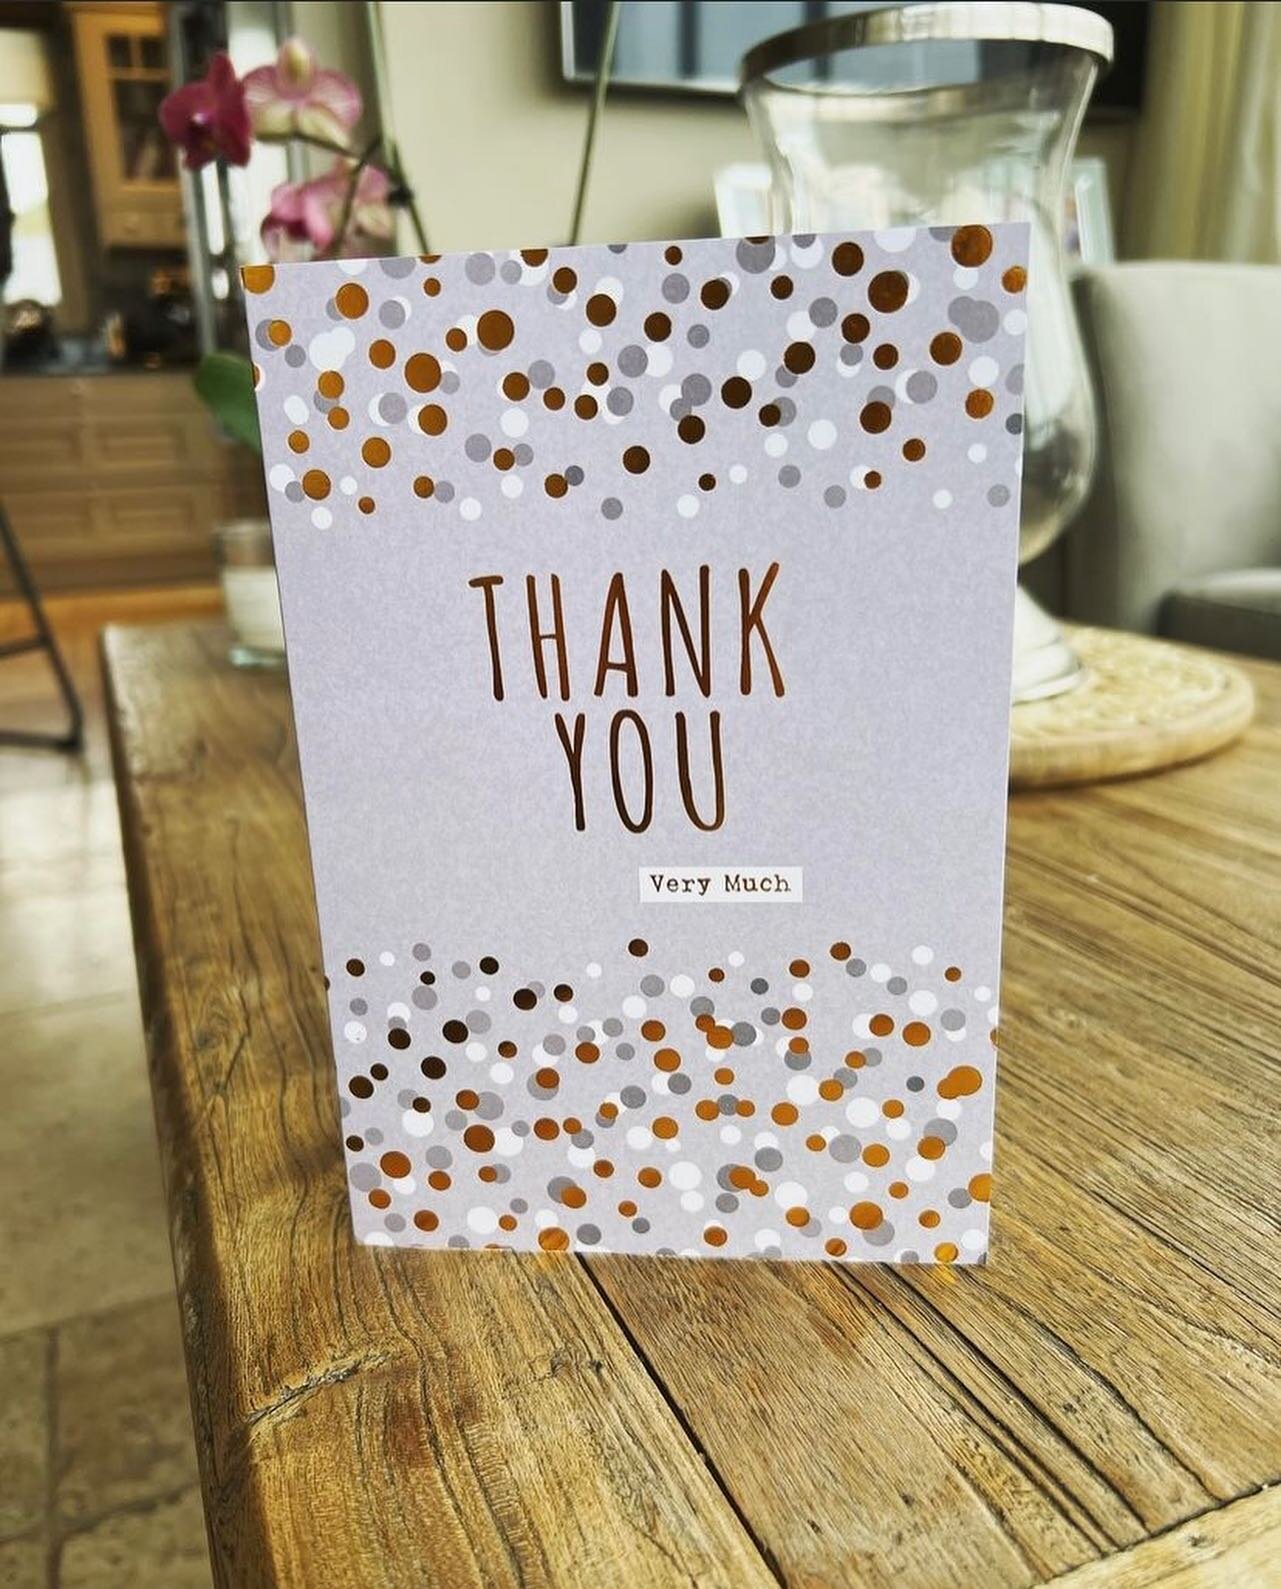 A thank you card from very happy clients ☺️🥂🏠

We work extremely hard to make sure all of our clients are 100% satisfied with the job we do. 

If you have any questions, queries or would like a quote, don&rsquo;t hesitate to get in touch - 087 675 